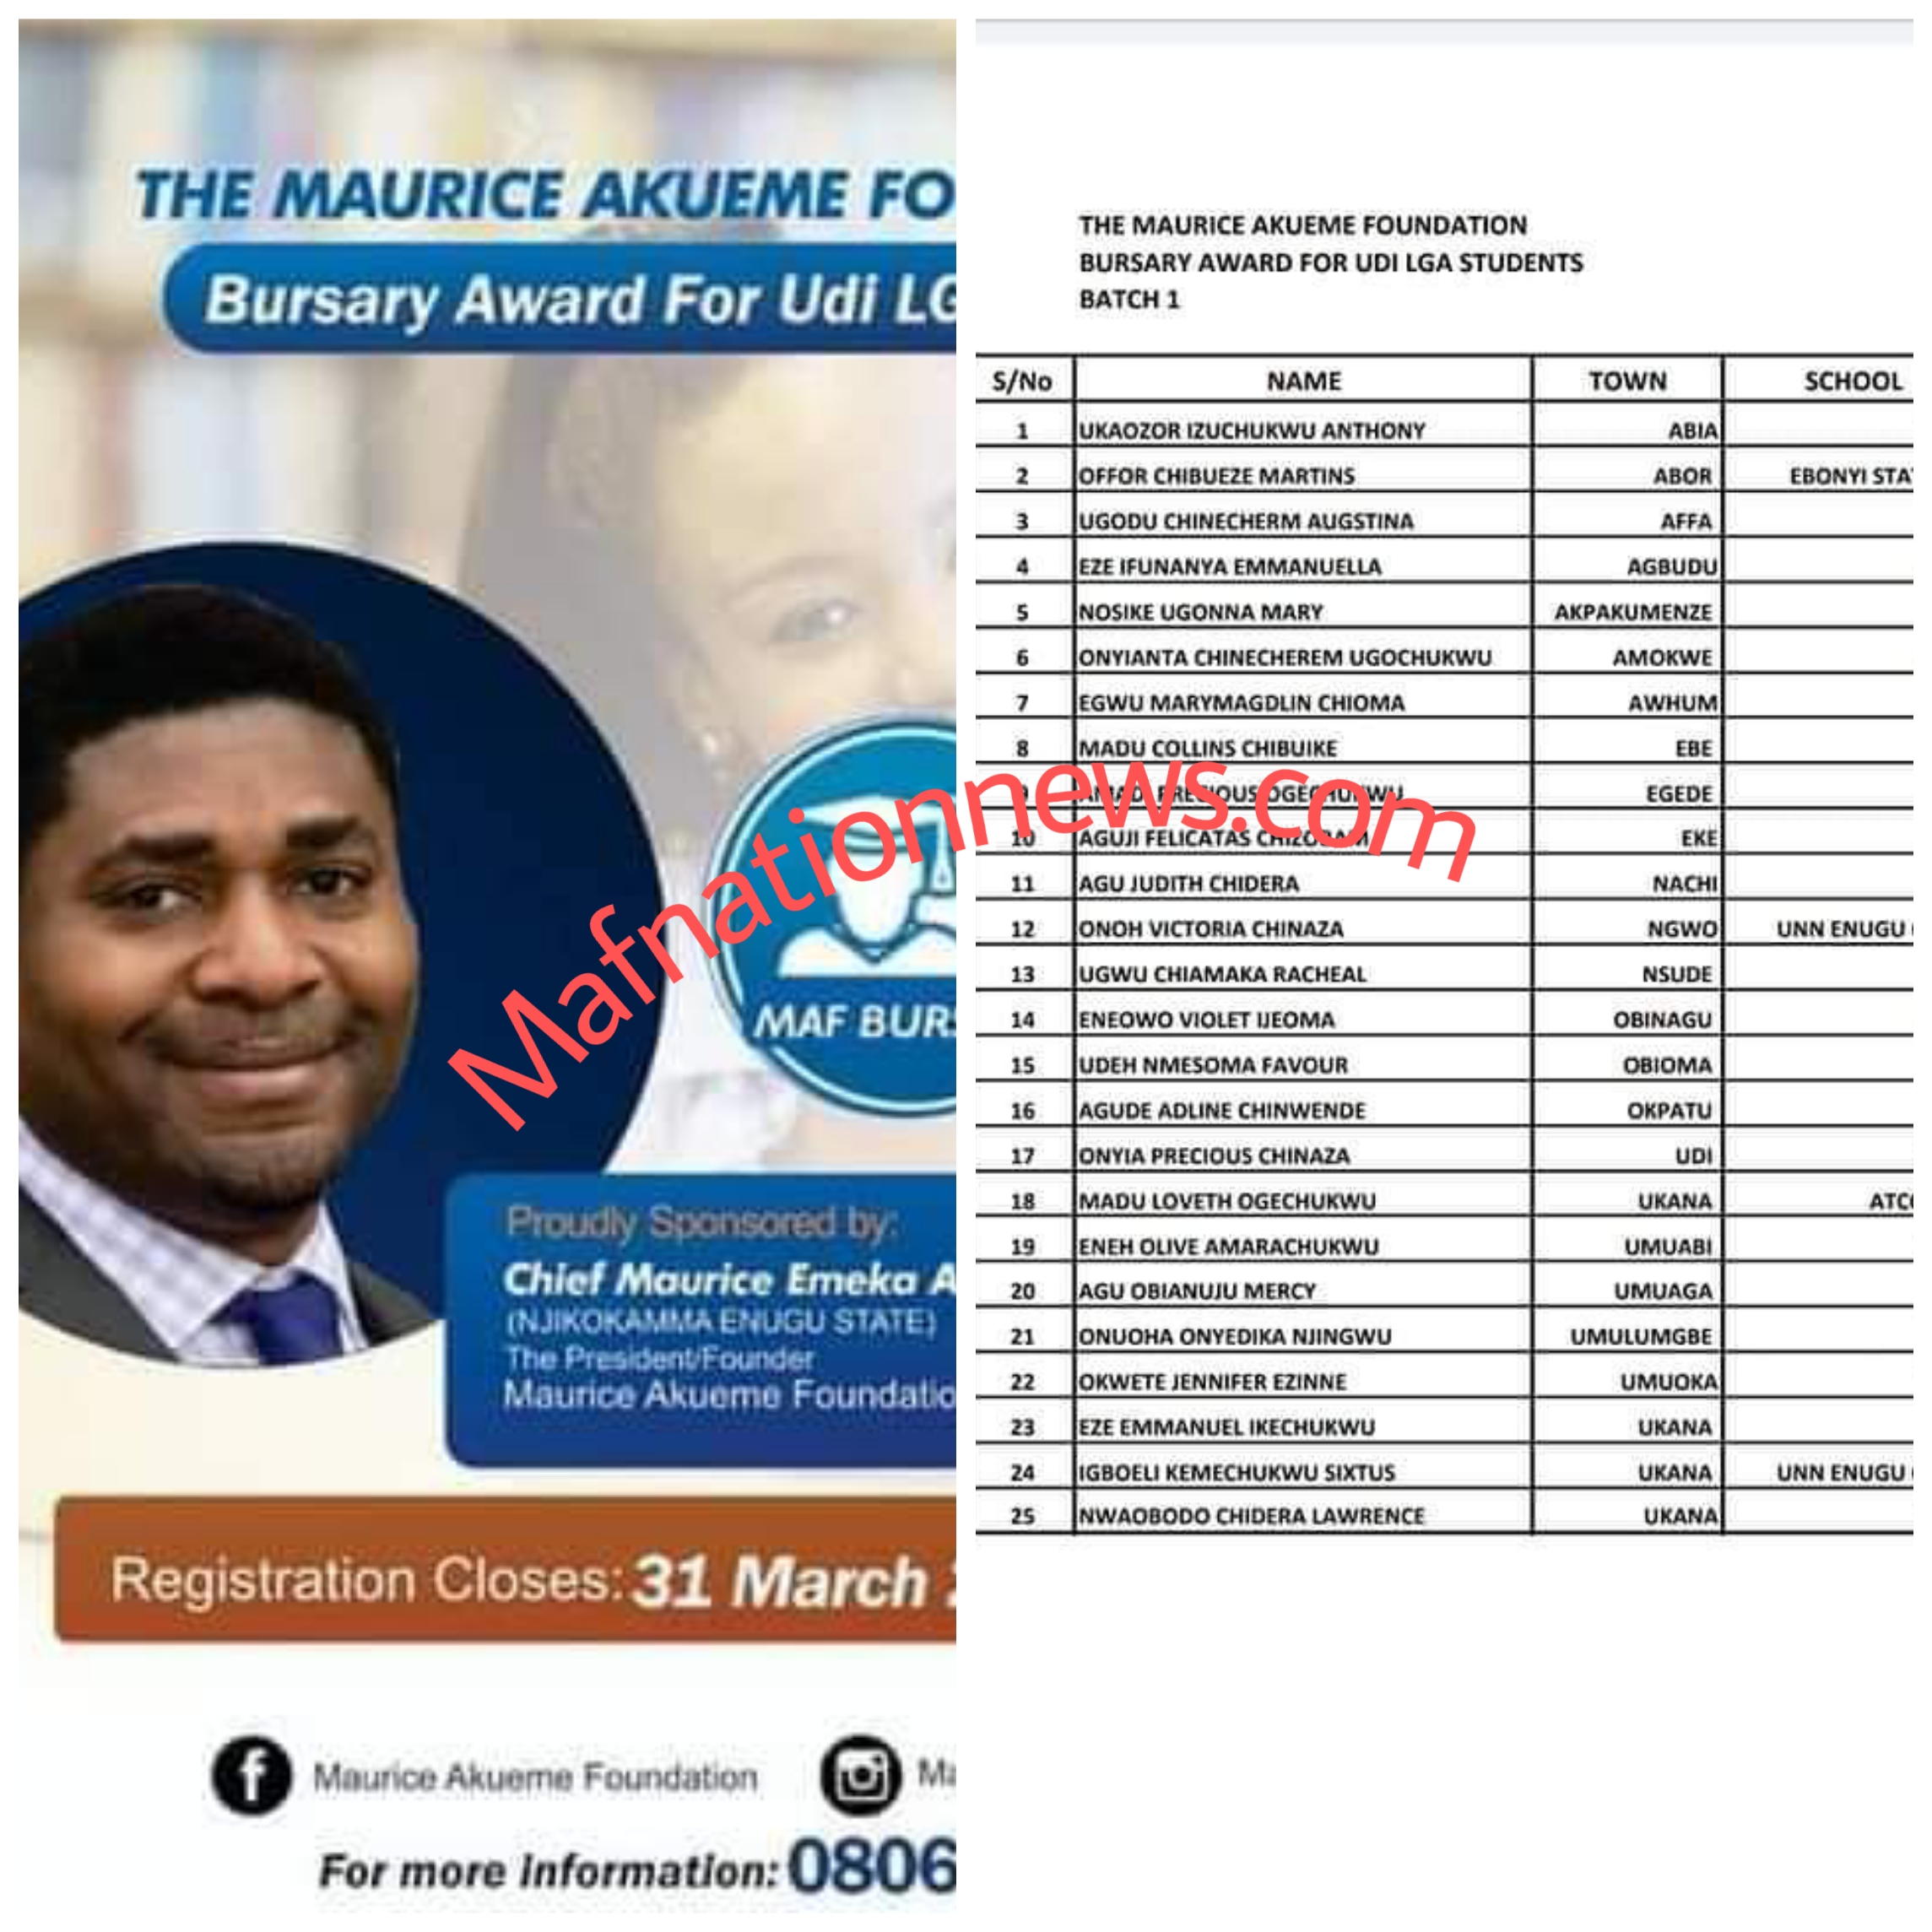 Akueme Disburses Bursary Funds To First Batch of 100 Students of Udi Local Government Origin in His Normal Support to Governor Ugwuanyi on Student Welfare